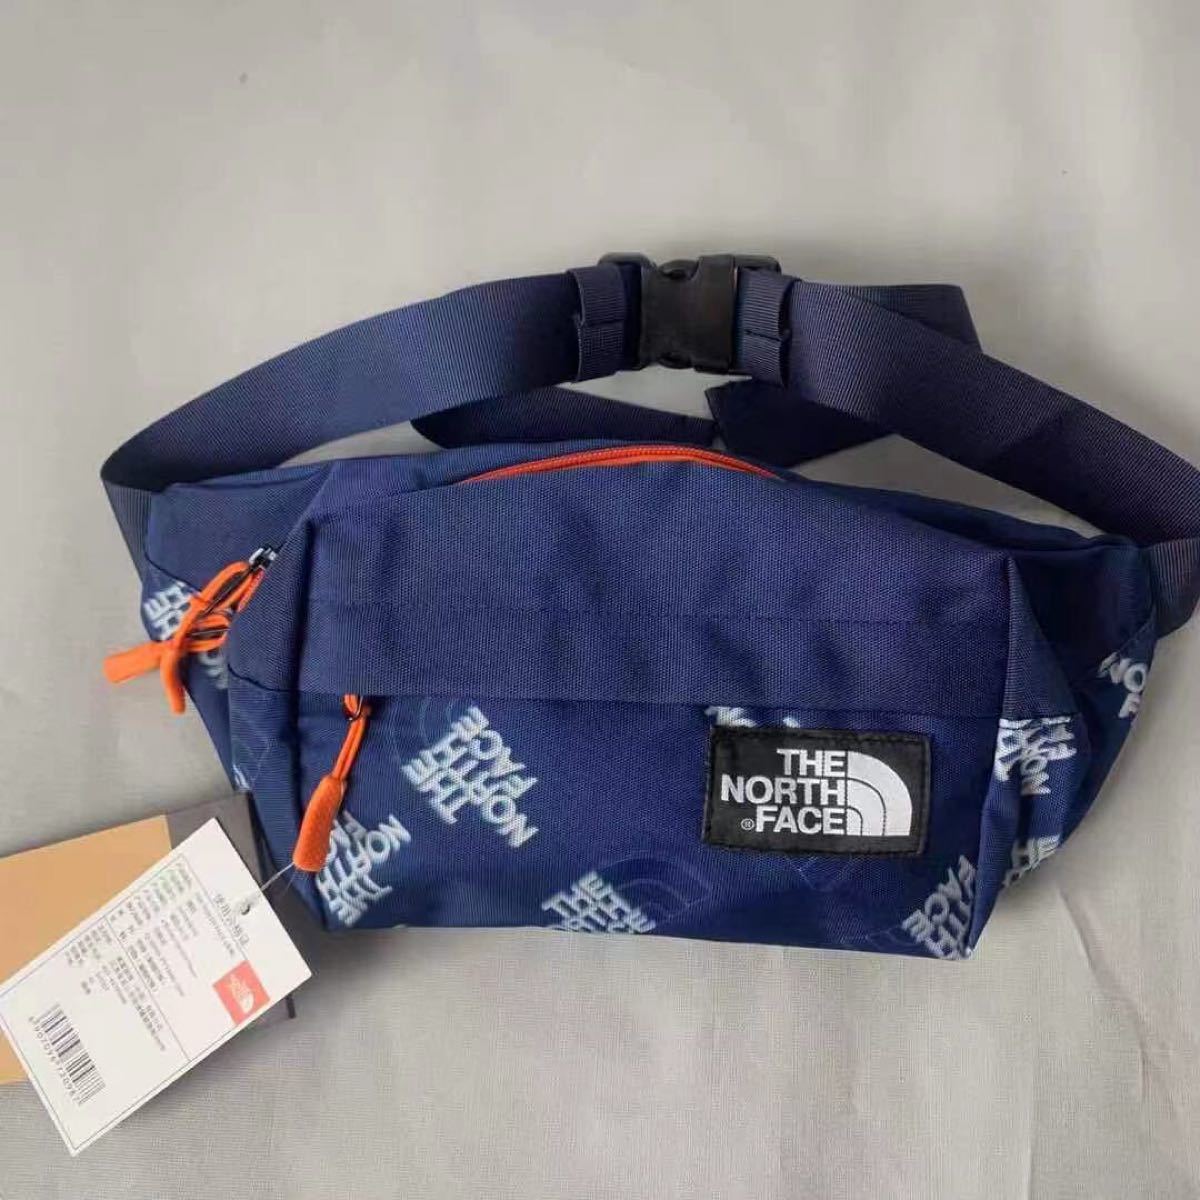 PayPayフリマ｜2021年新商品 THE NORTH FACE ウエストバッグ